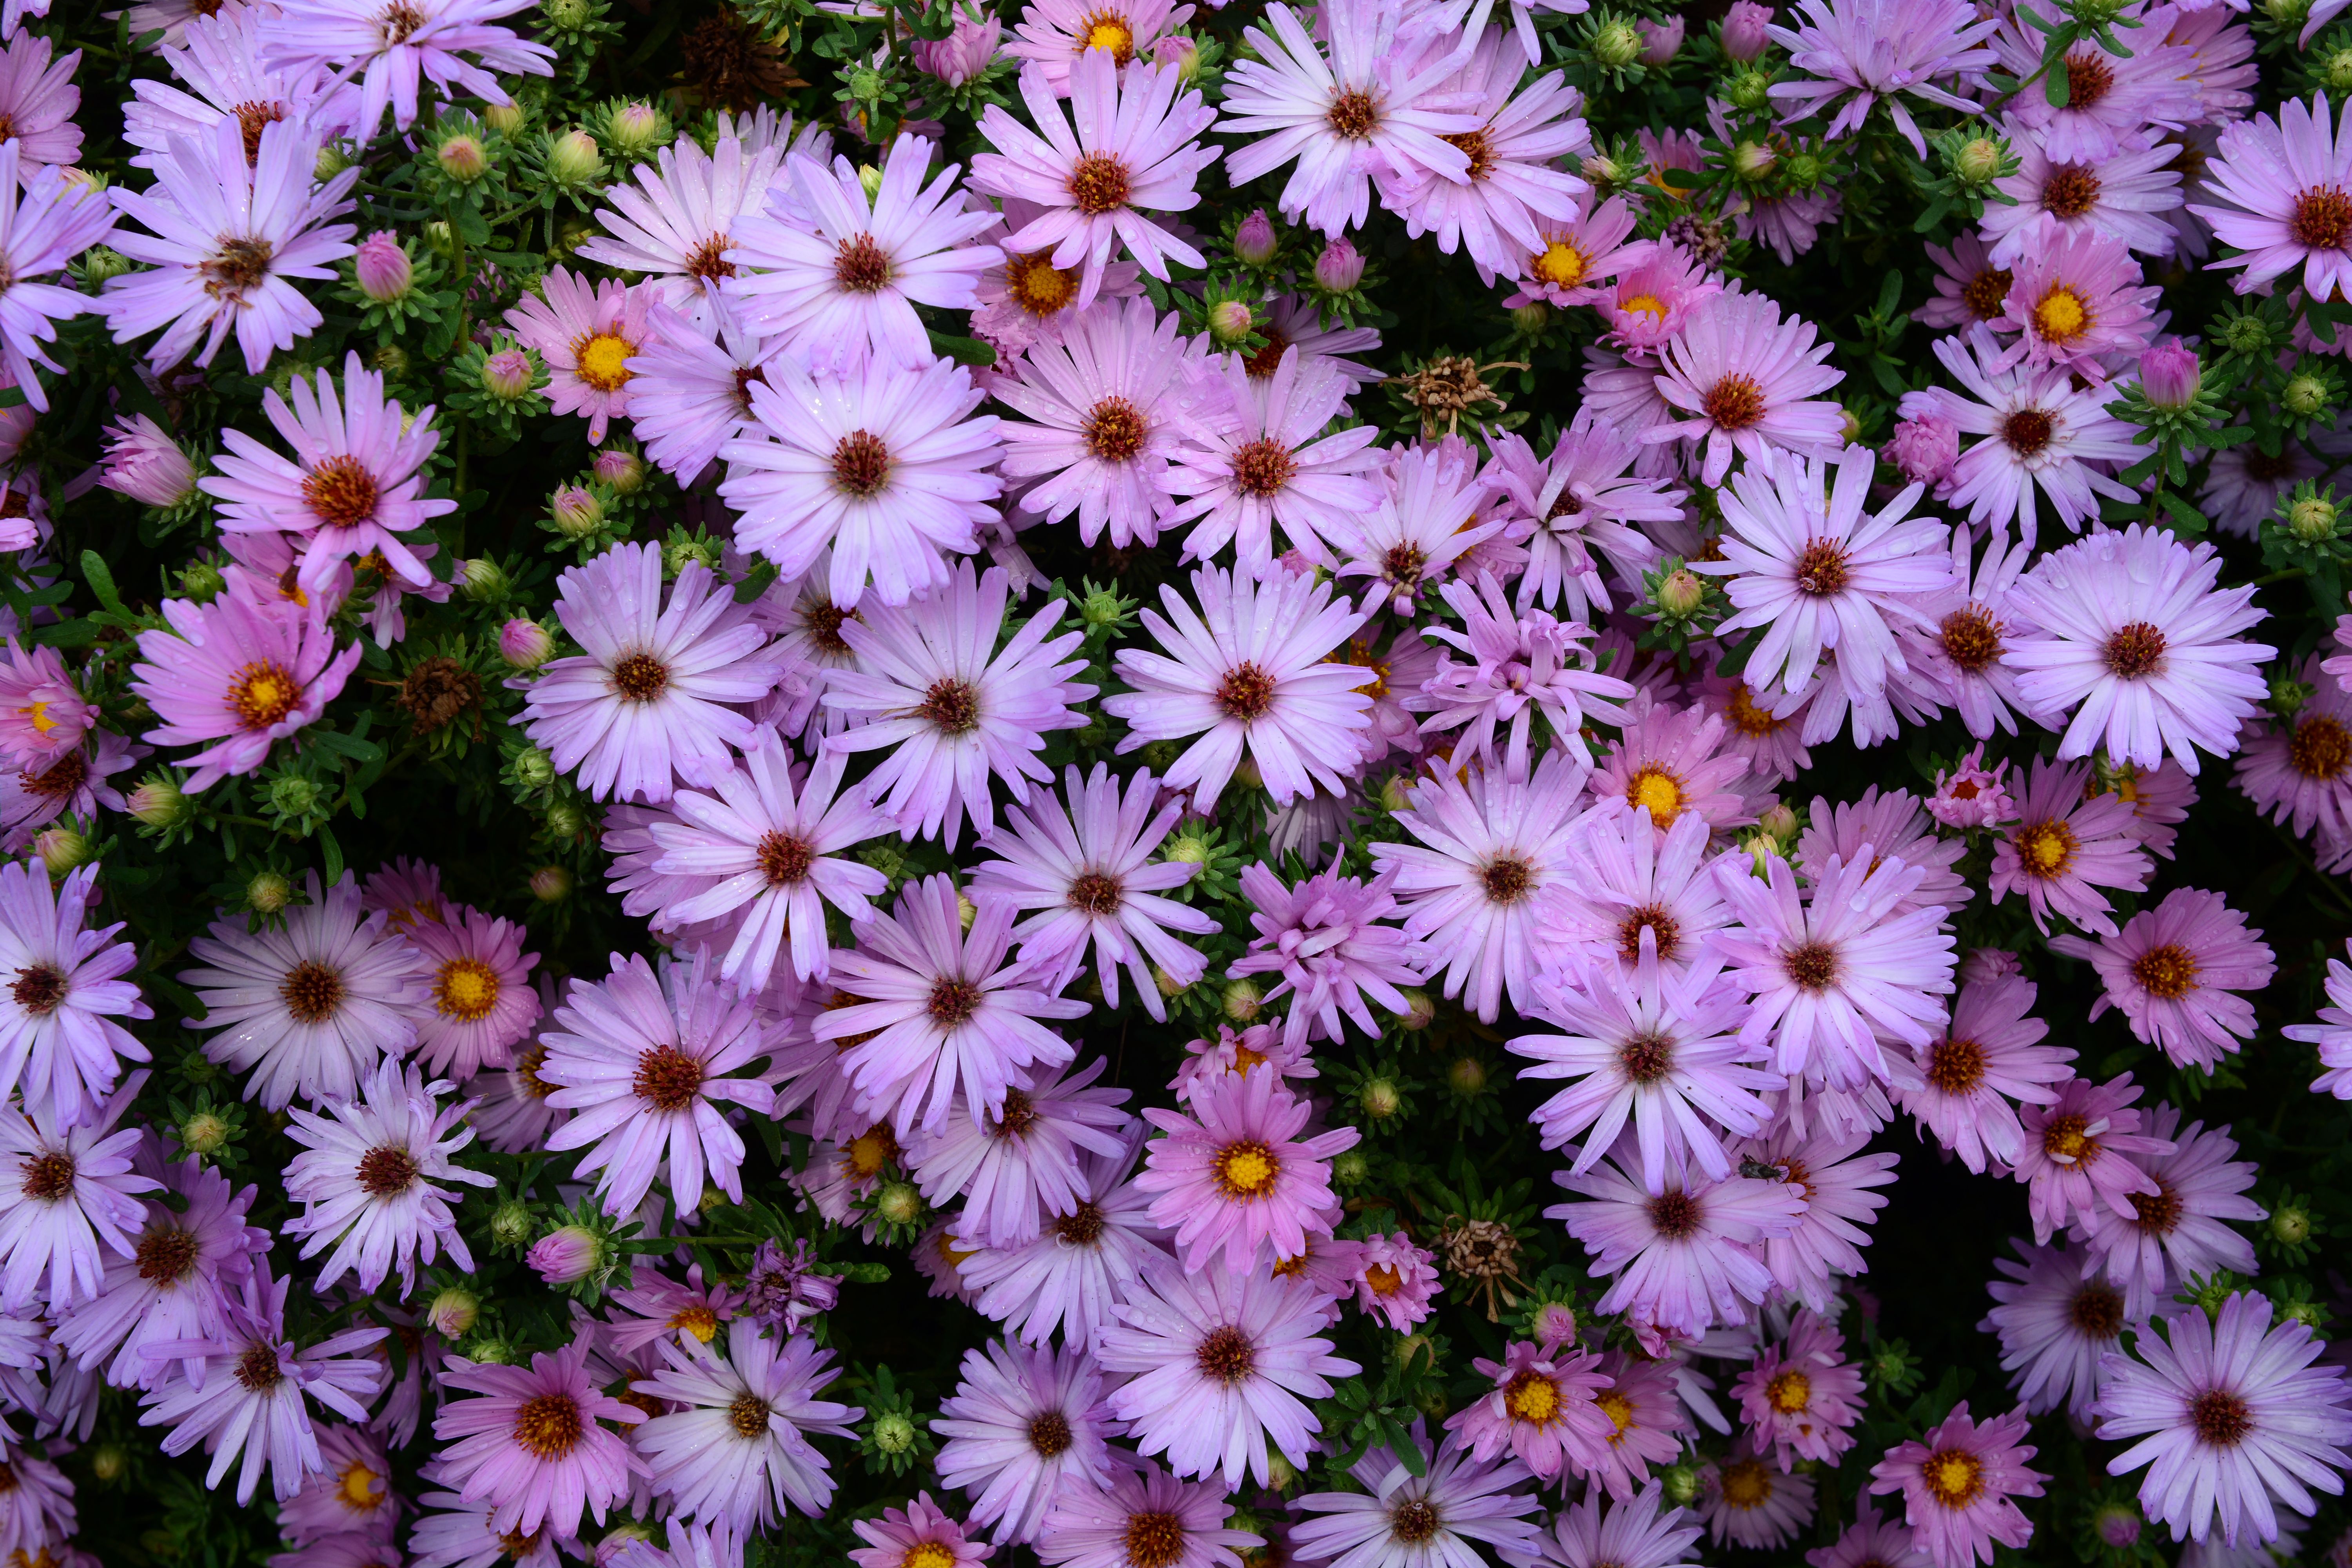 images/plants/aster/ast-billowing-pink/ast-billowing-pink-0006.jpg